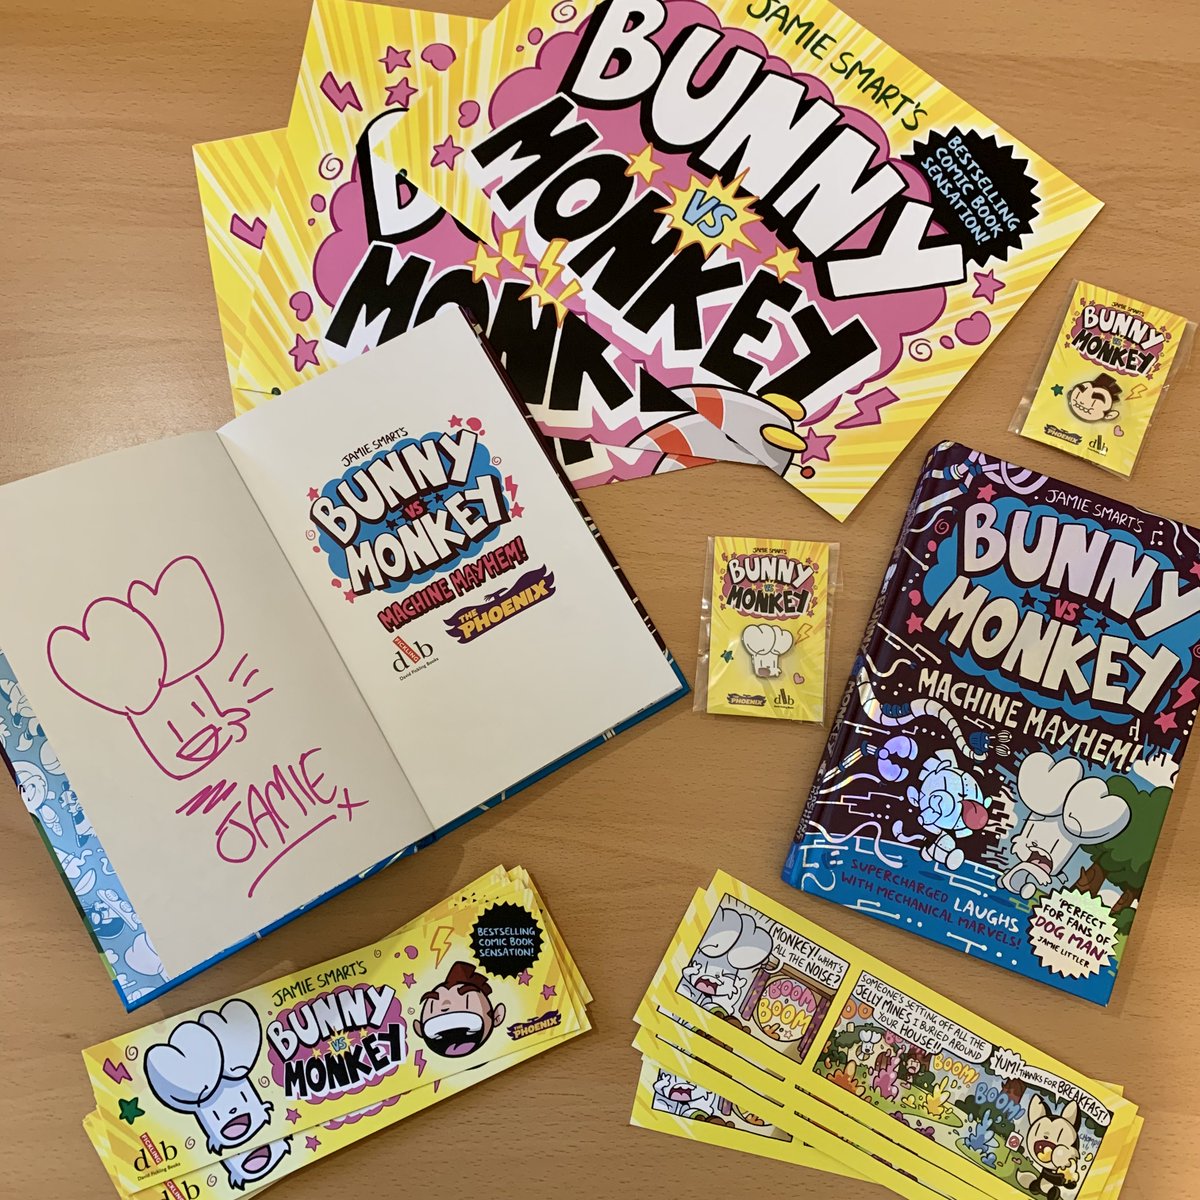 🌟🌟🌟 Win this awesome BUNNY VS MONKEY bundle of goodies! 🌟🌟🌟 ➡️ Follow & RT by 31/12 to win a copy of Machine Mayhem *signed* by @jamiesmart, bookmarks, posters & Bunny and Monkey pins! UK only - good luck! 🍀